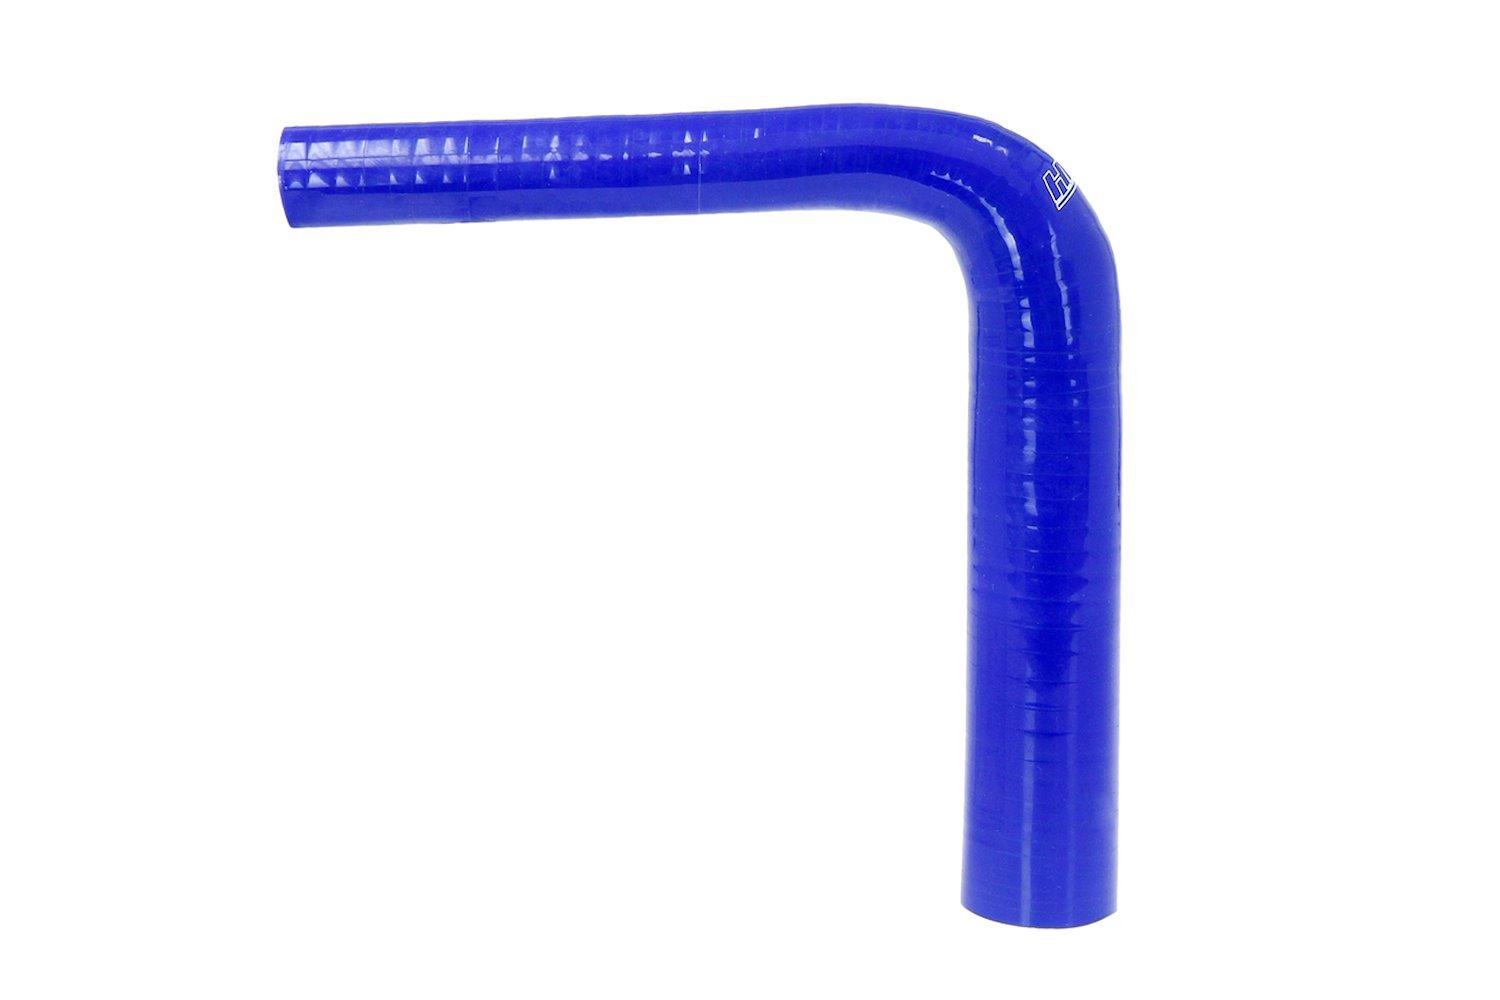 HTSER90-175-250-BLUE Silicone 90-Degree Elbow Hose, High-Temp 4-Ply Reinforced, 1-3/4 in. - 2-1/2 in. ID, Blue